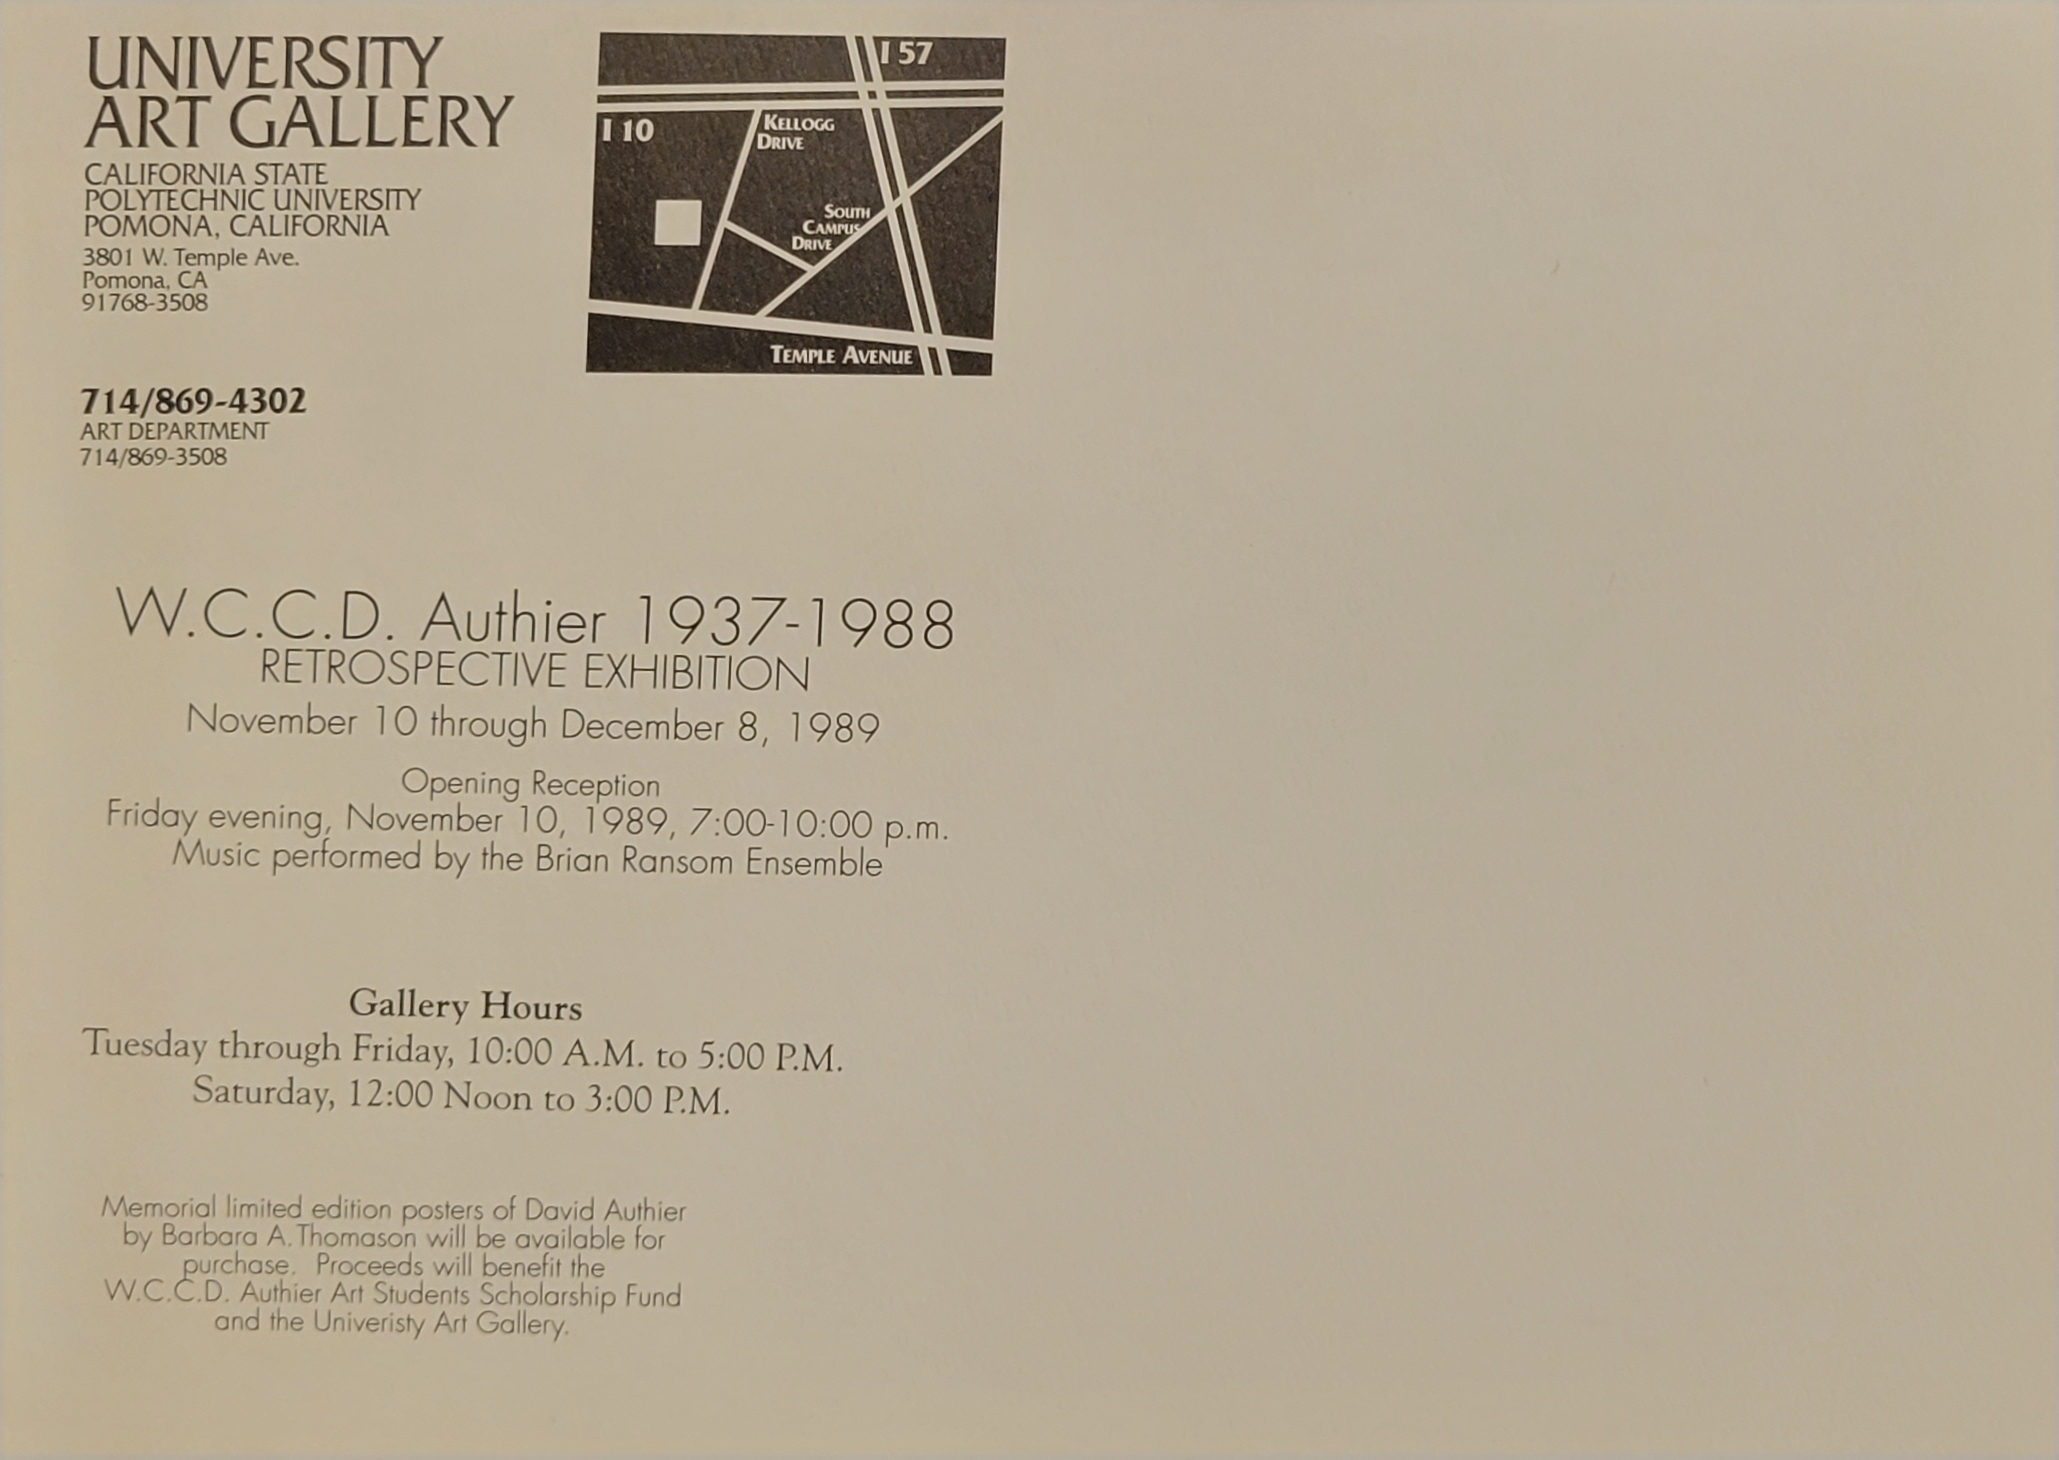 Friday, November 10, 1989 - 7:00 PM to 10:00 PM Opening Reception: W.C.C.D. Author 1937-1988 Retrospective Exhibition  Music performed by the Brian Ransom Ensemble. Memorial limited edition posters of avid Authier by Barbara A. Thomason will be available for purchase. 